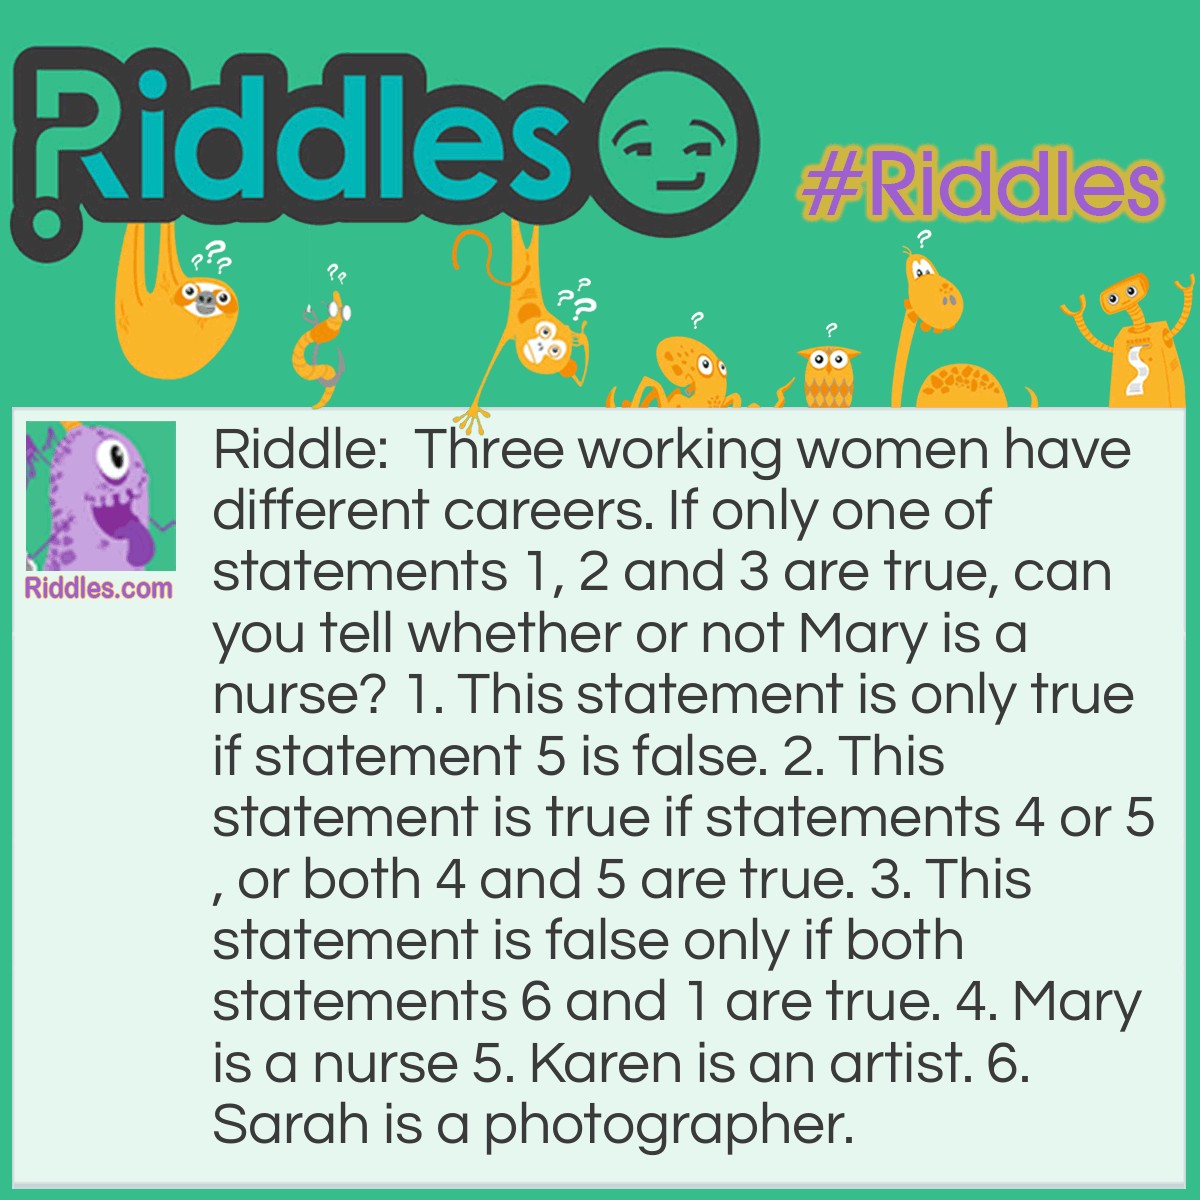 Riddle: Three working women have different careers. If only one of statements 1, 2 and 3 are true, can you tell whether or not Mary is a nurse? 1. This statement is only true if statement 5 is false. 2. This statement is true if statements 4 or 5, or both 4 and 5 are true. 3. This statement is false only if both statements 6 and 1 are true. 4. Mary is a nurse 5. Karen is an artist. 6. Sarah is a photographer. Answer: Mary is not a nurse. The way to solve this riddle, is to consider statements 4, 5, and 6 and create a chart of all possible true and false answers. Next, fill in the chart according to statements 1 through 3. You will discover that there is only one line where only one of statements one, two and three are true. Thus, it is determined that: Statement 4 and 5 are false and statement 6 is true.